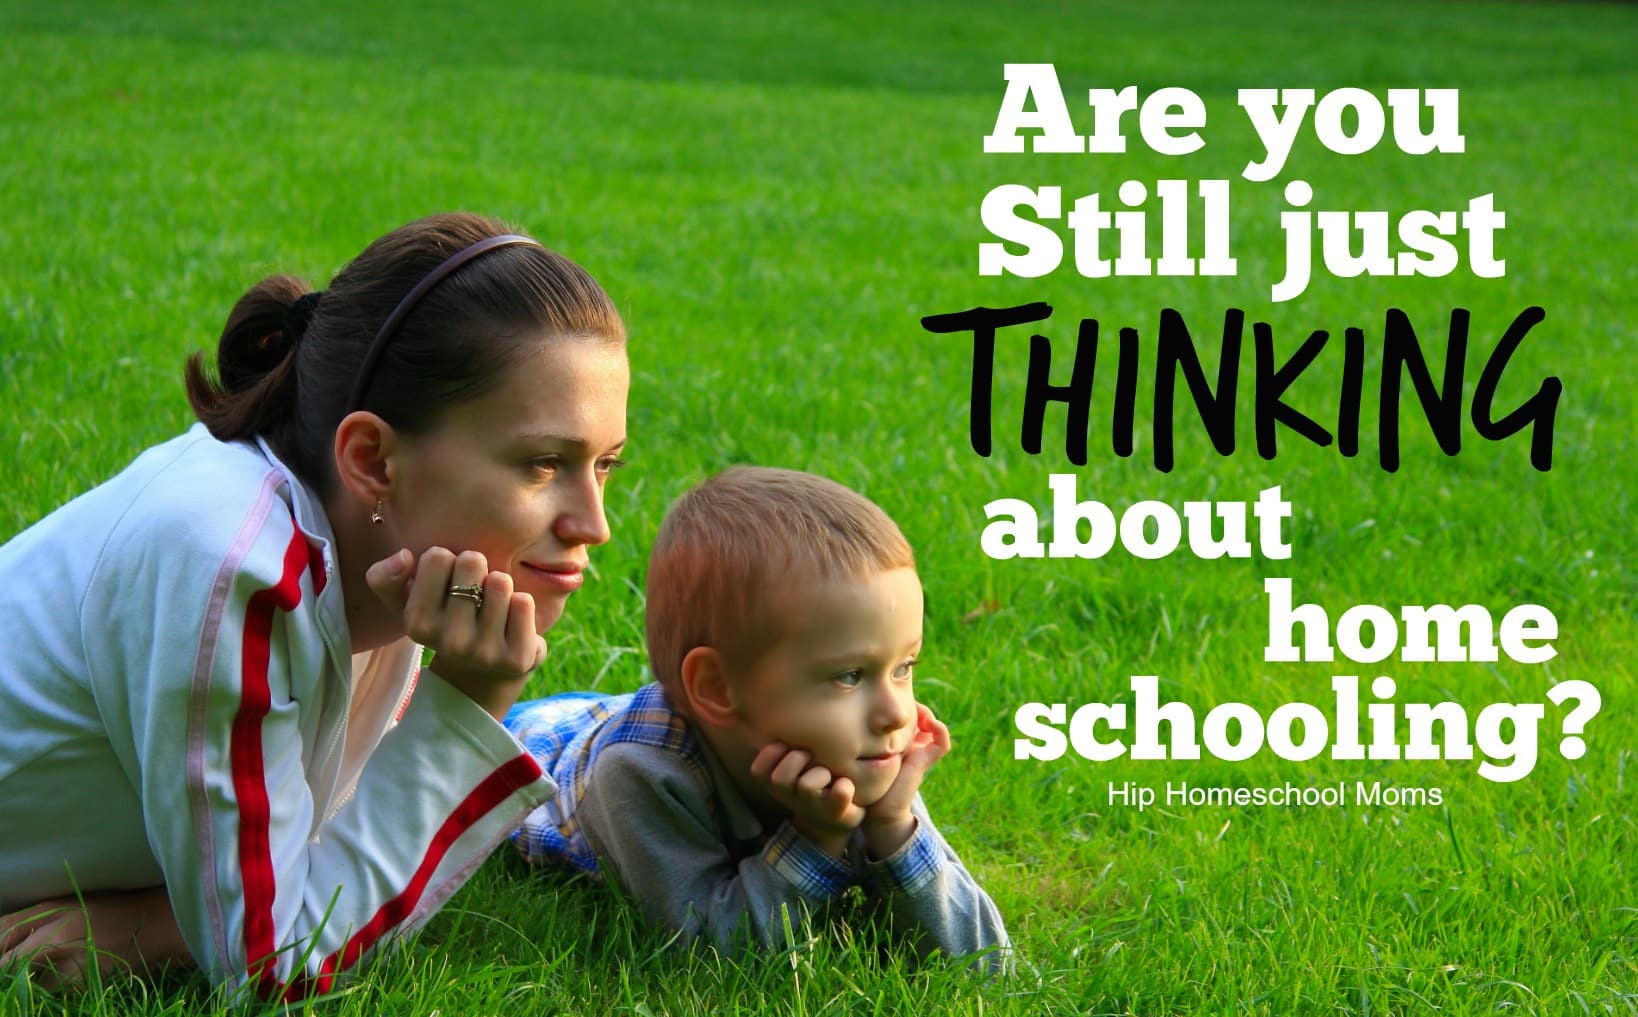 Are You Still Just Thinking About Homeschooling?